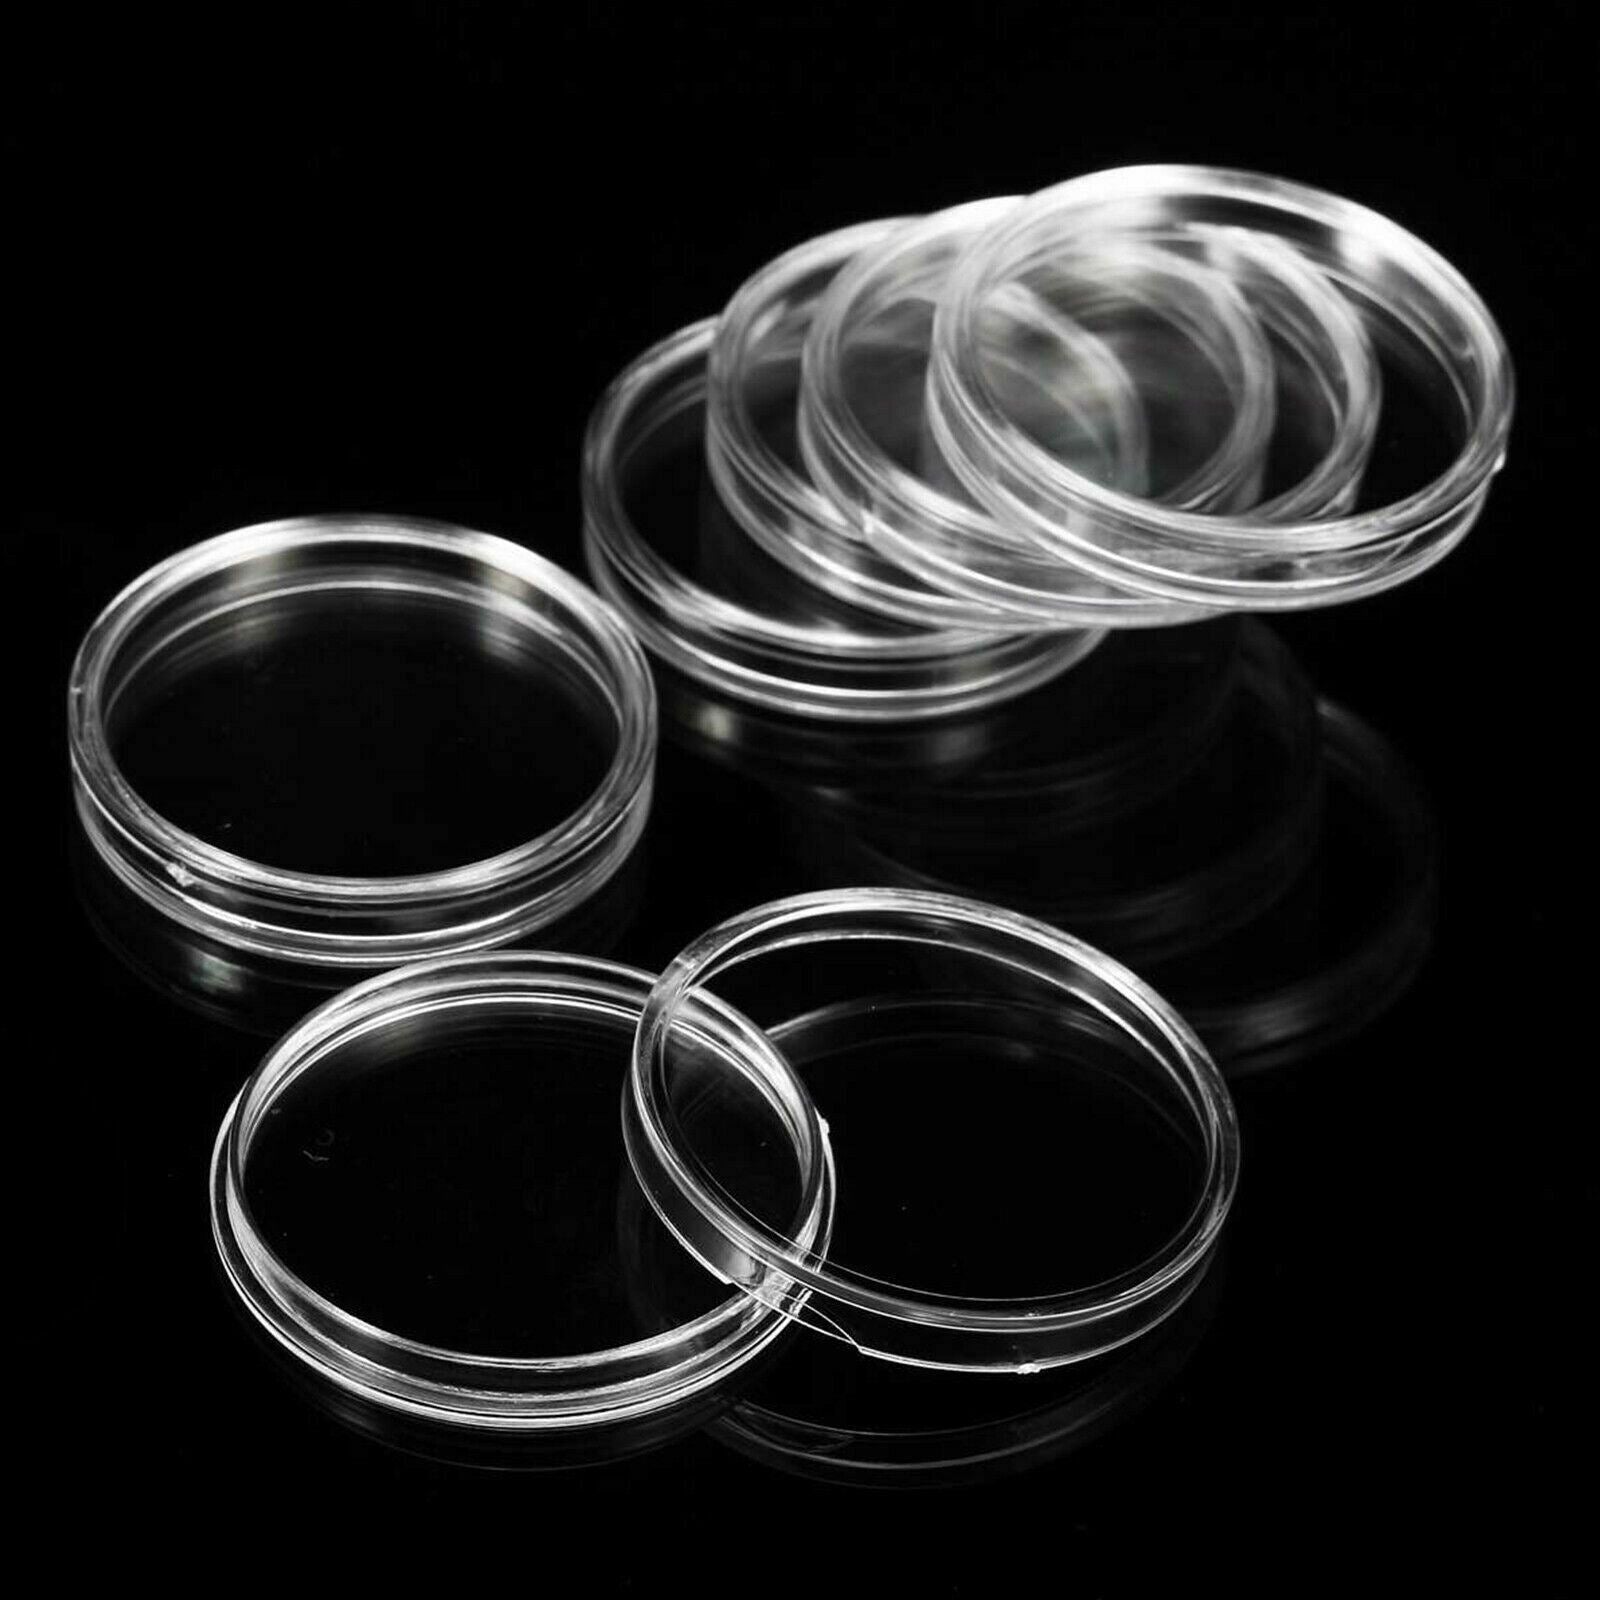 100Pcs 20/25/27/30mm Coin Clear Plastic Round Capsules Case Holder Storage Box